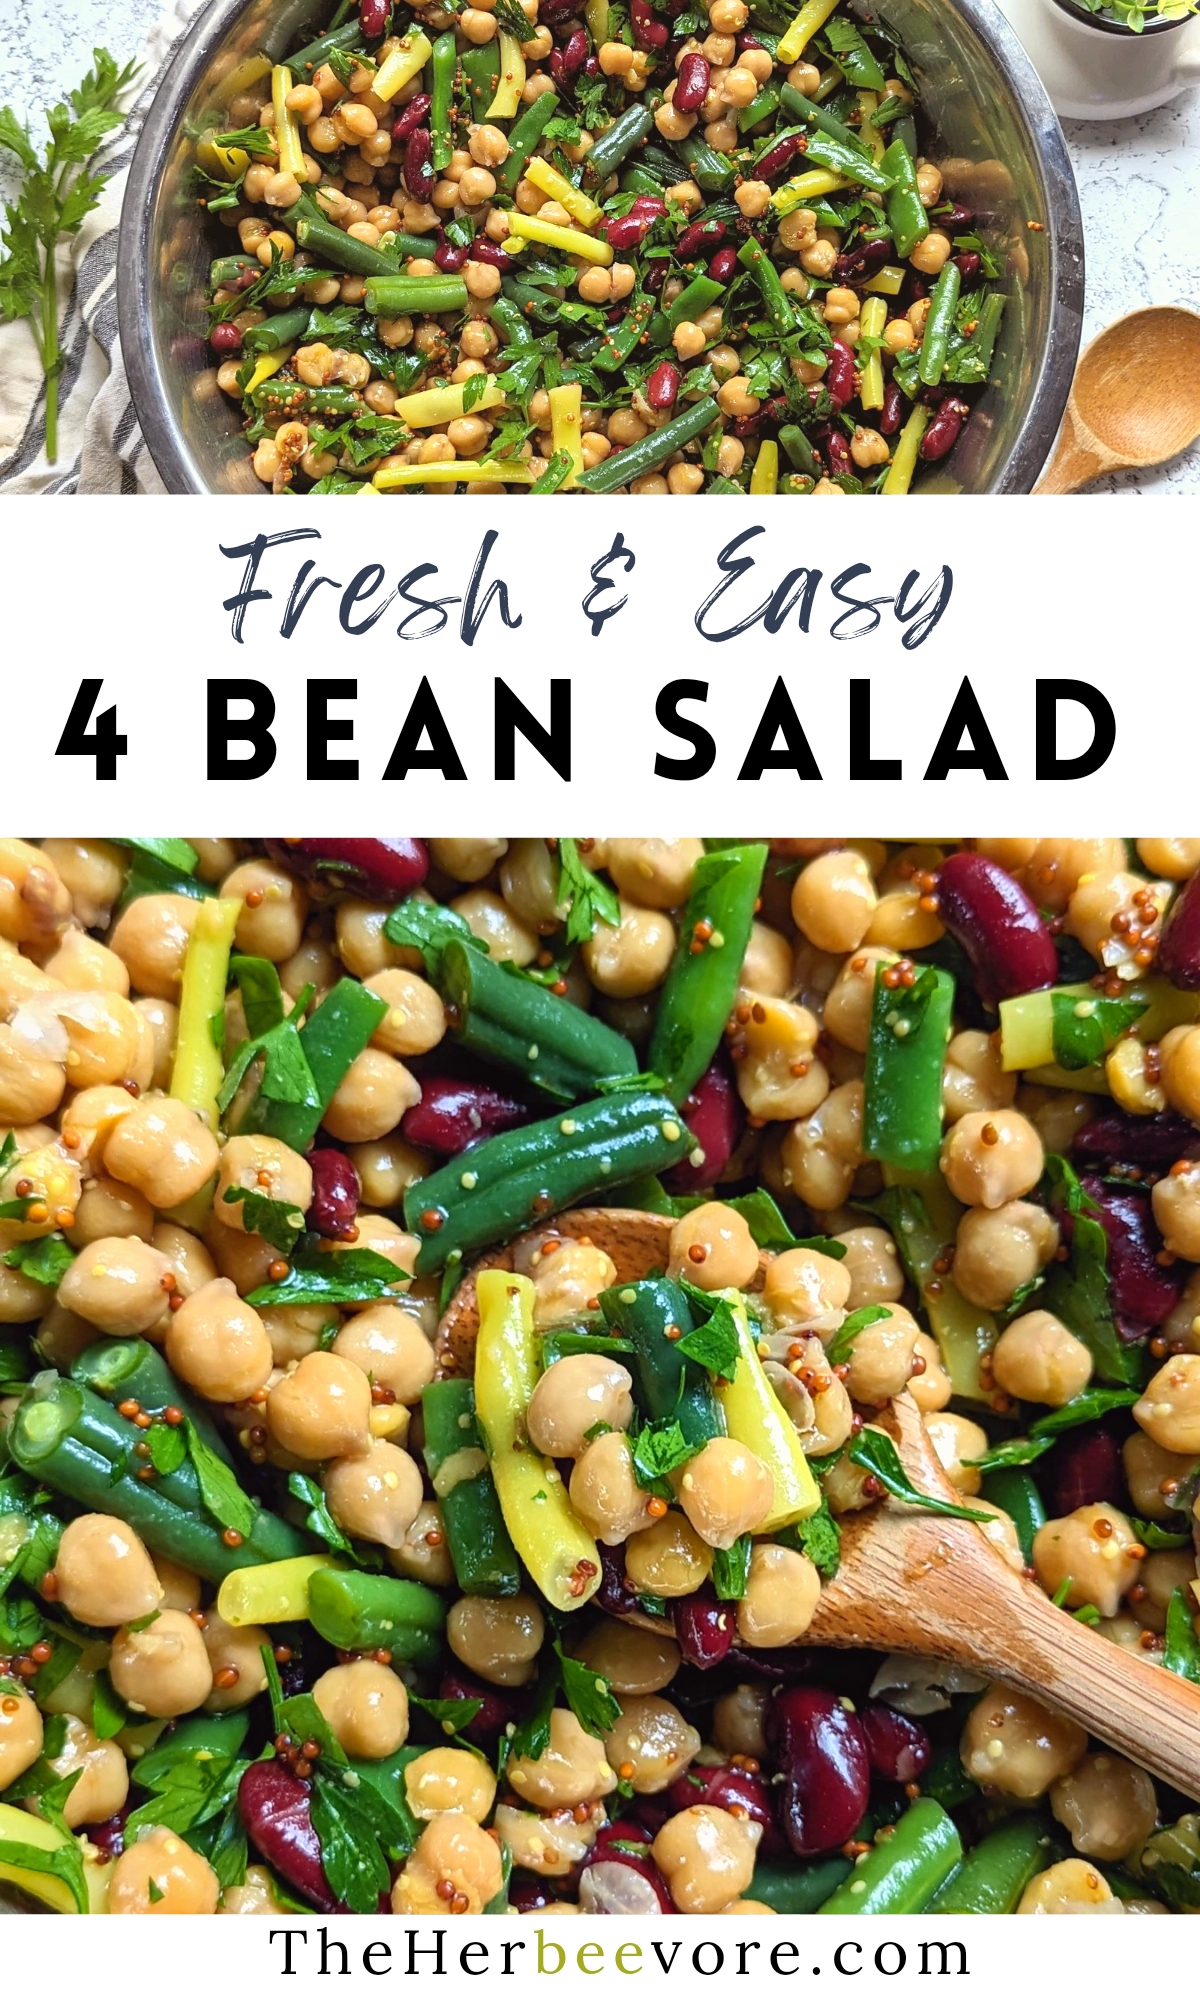 4 bean salad with fresh green beans yellow wax beans kidney beans and chickpeas